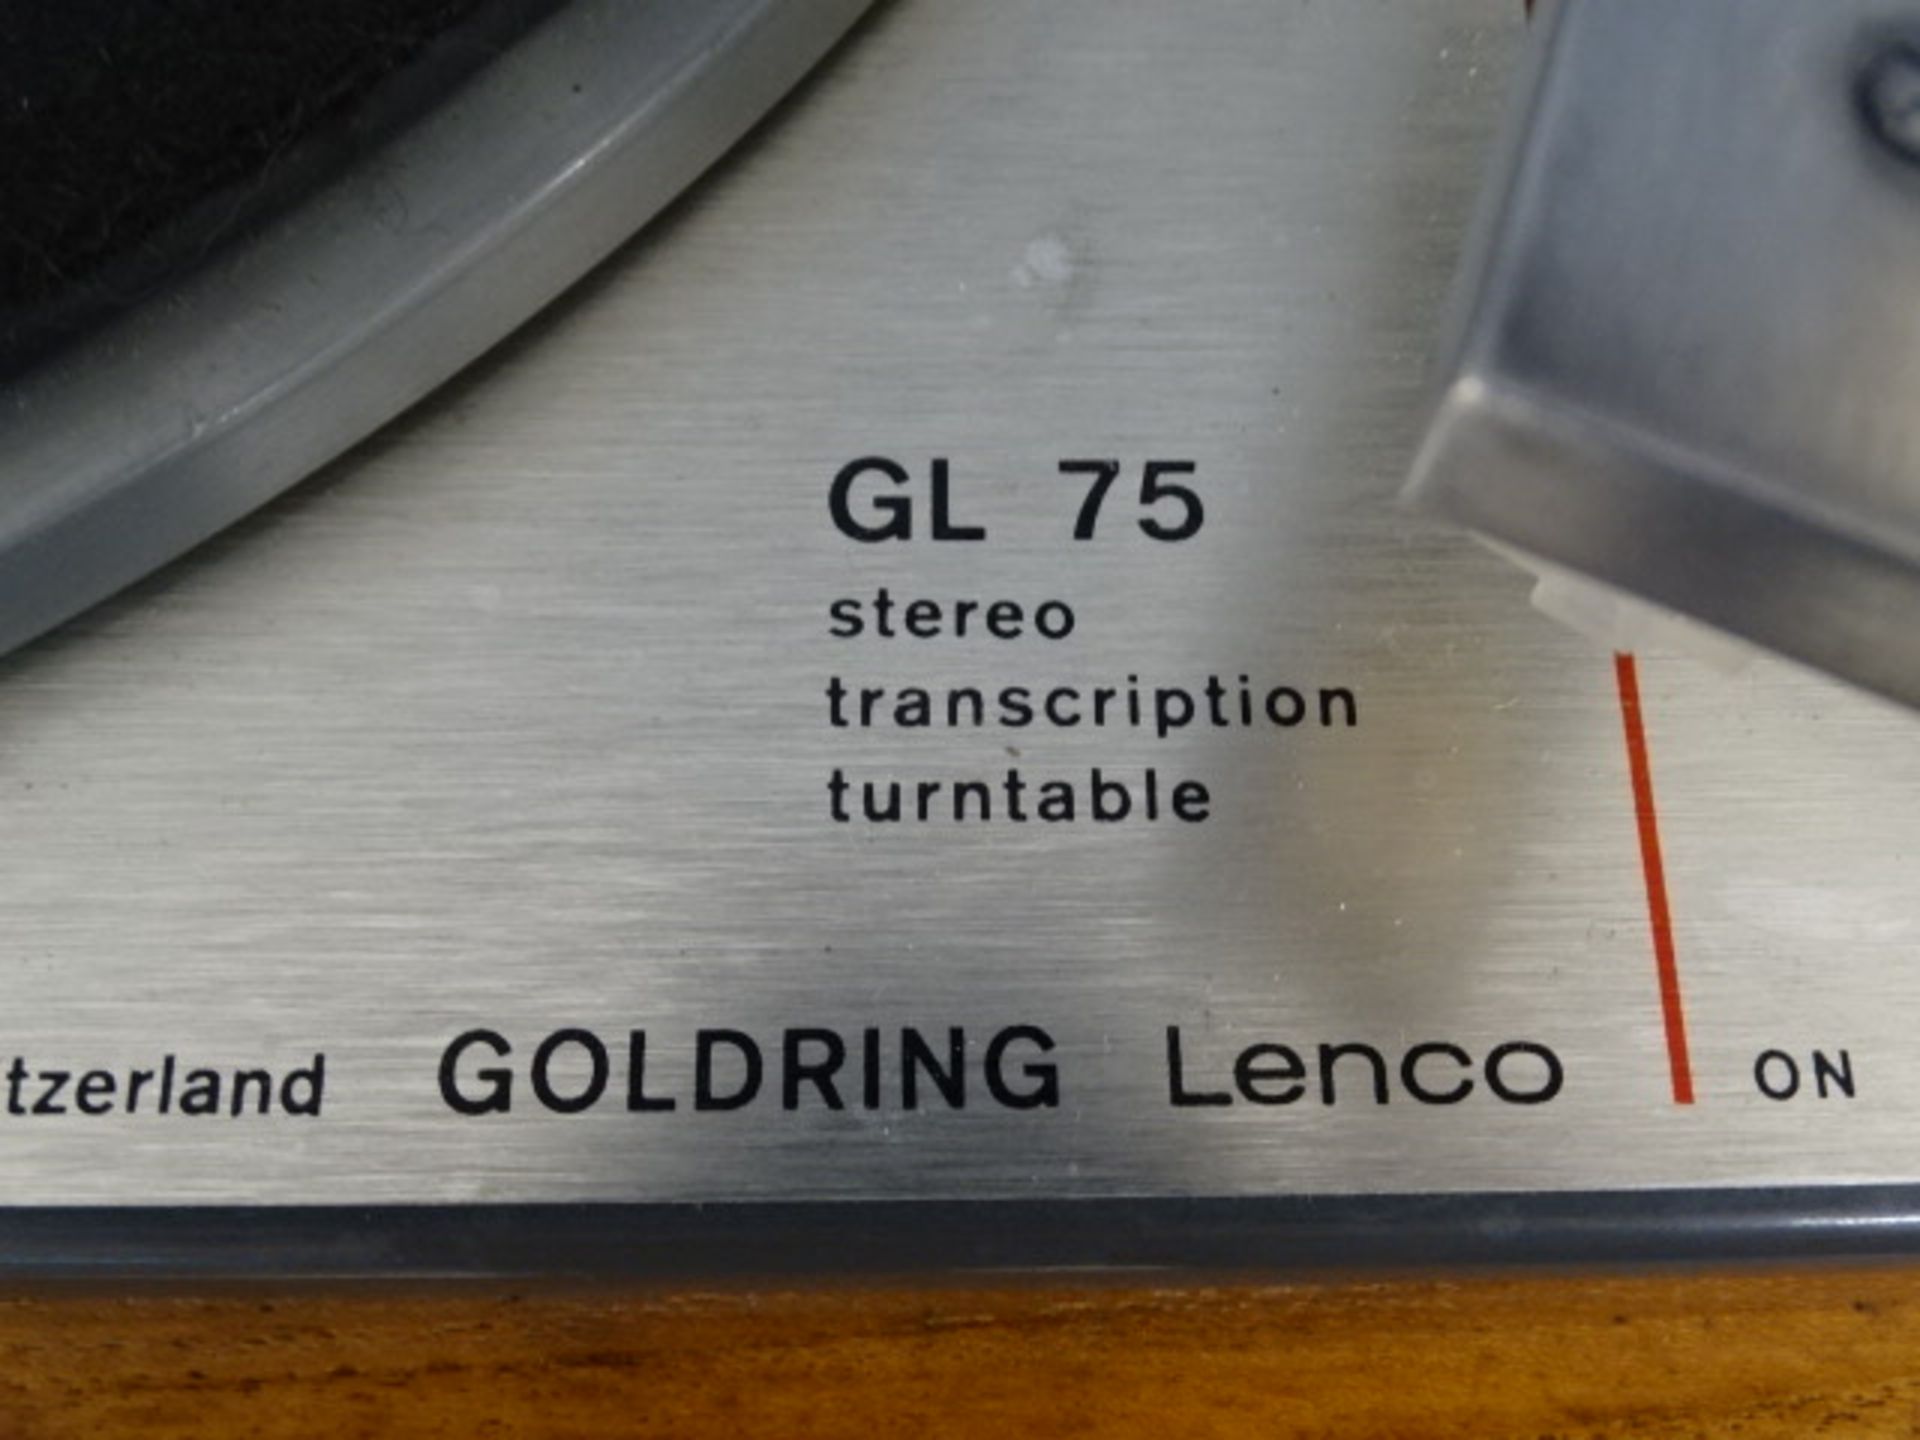 Vintage Goldring Lenco GL 75 stereo transcription turntable from a house clearance - Image 2 of 3